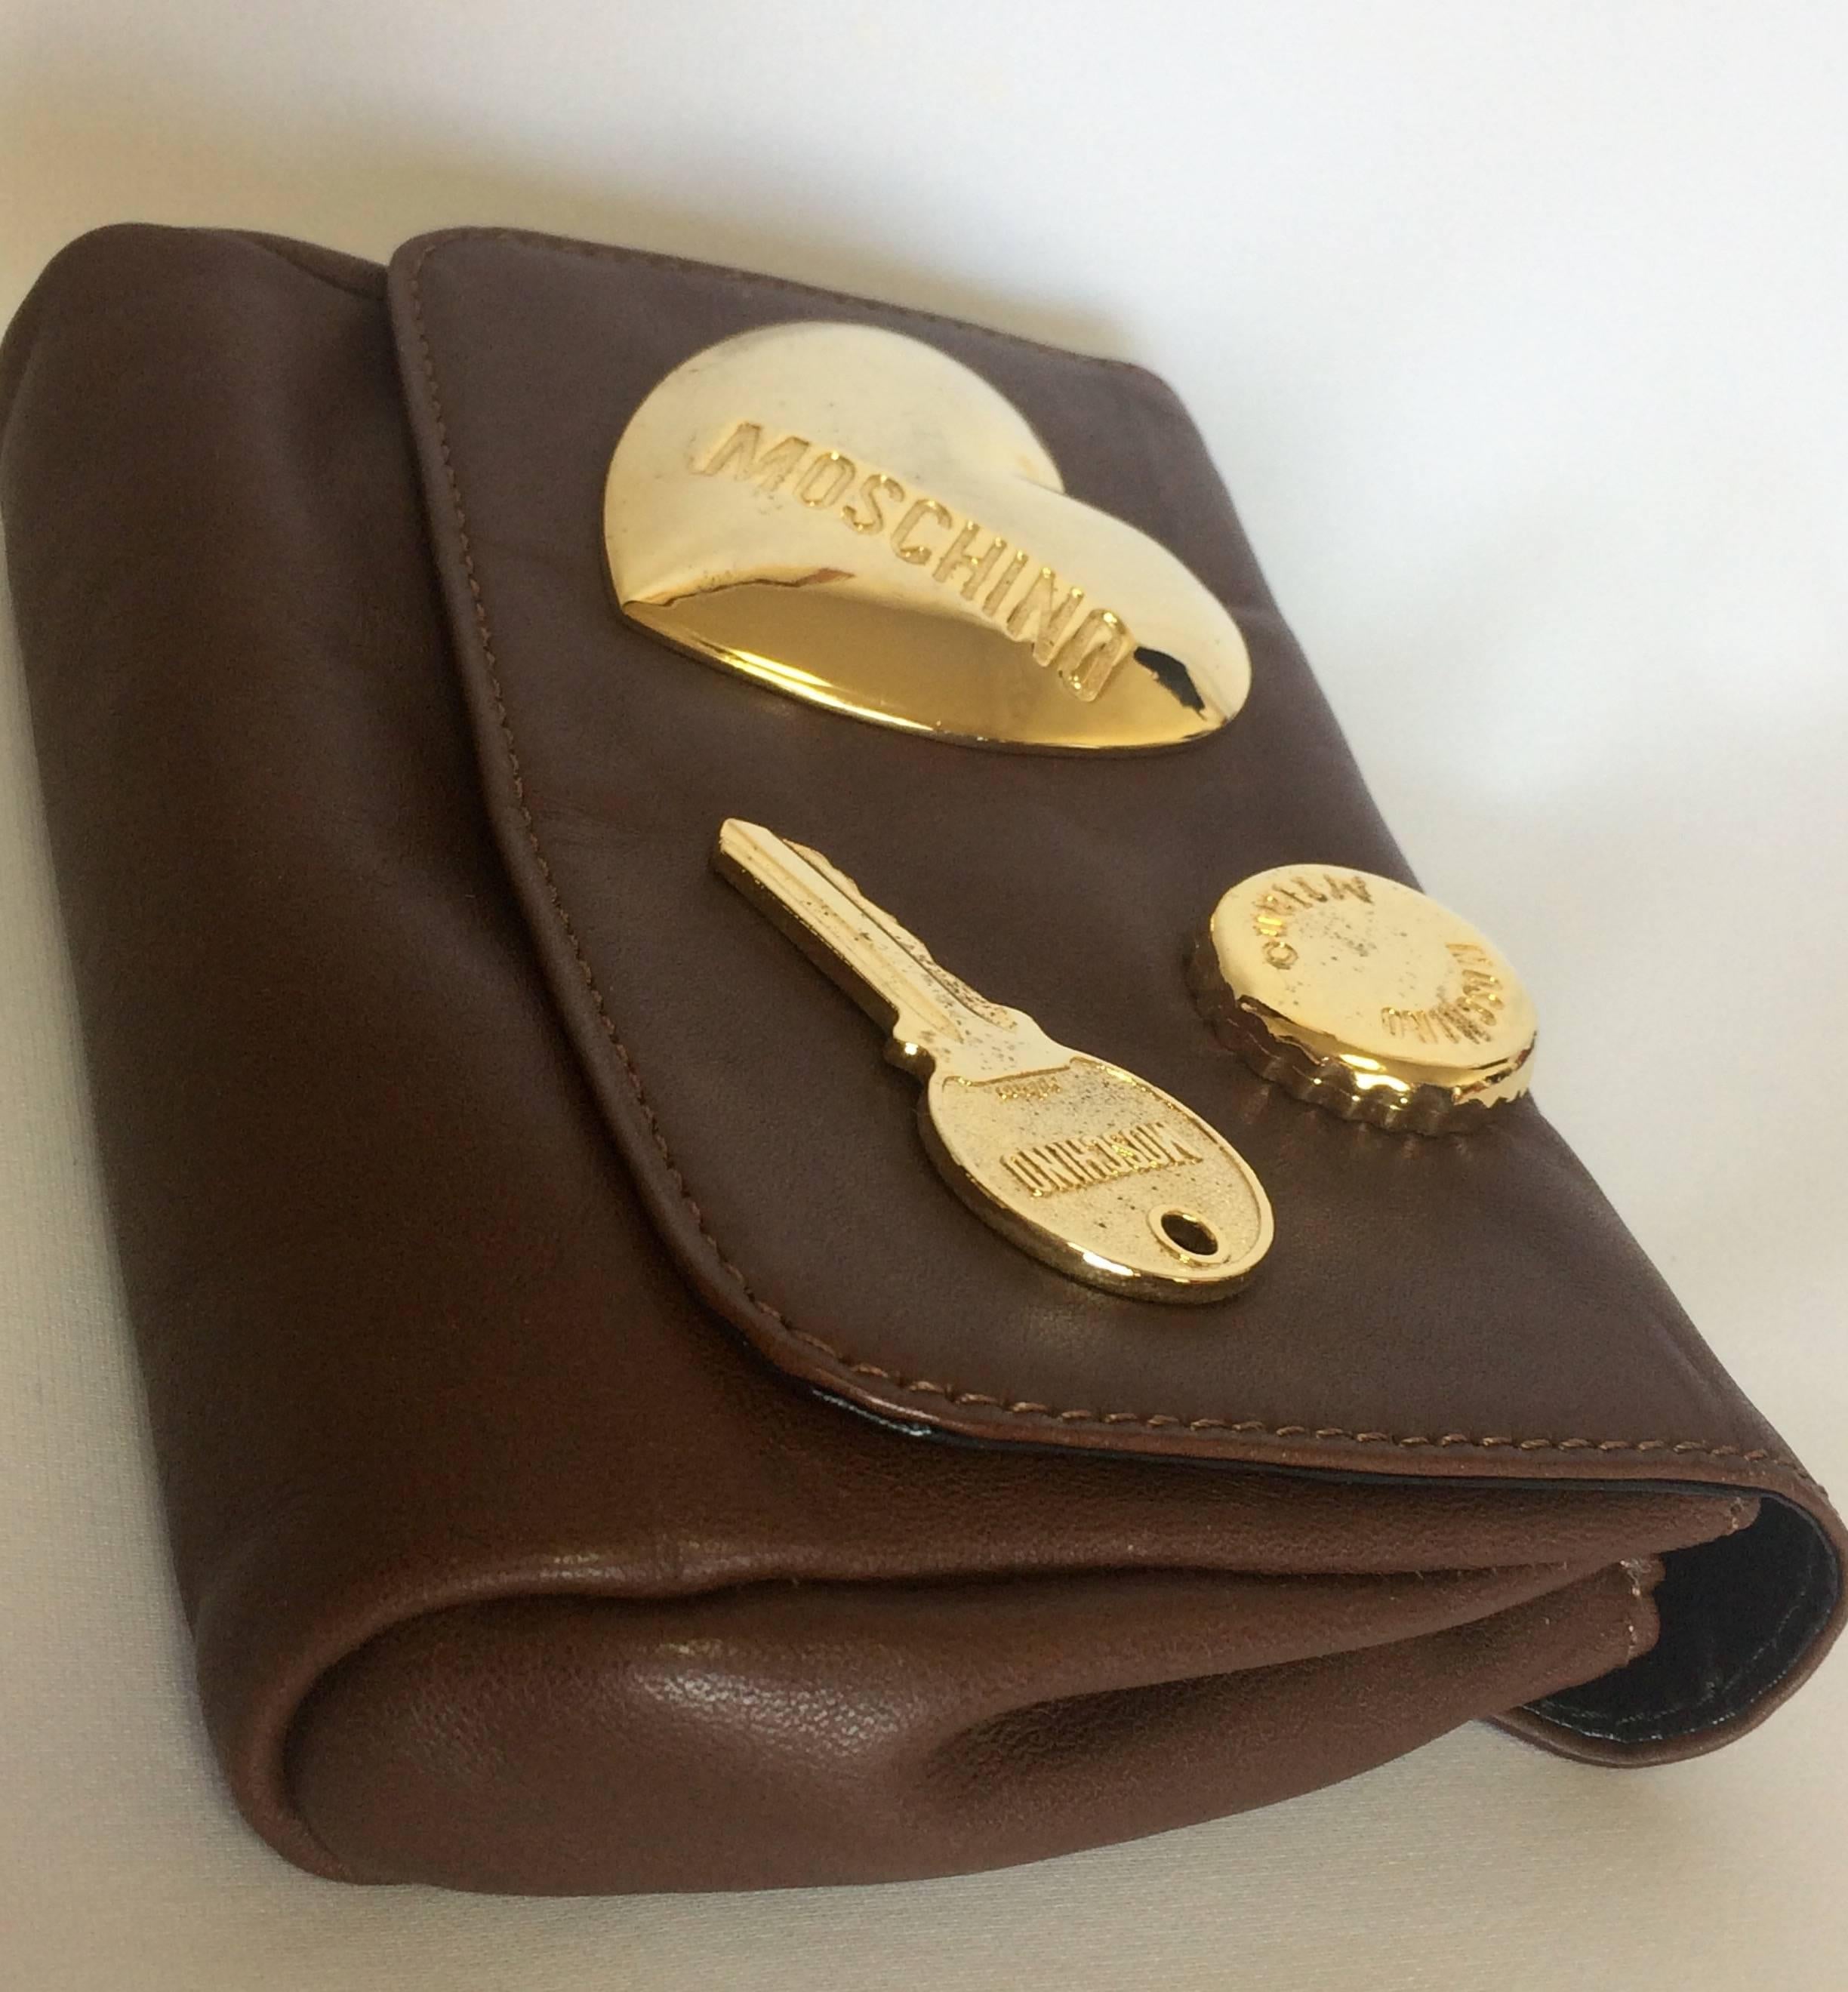 Brown Vintage MOSCHINO chocolate brown leather waist purse, fanny bag, clutch bag. For Sale